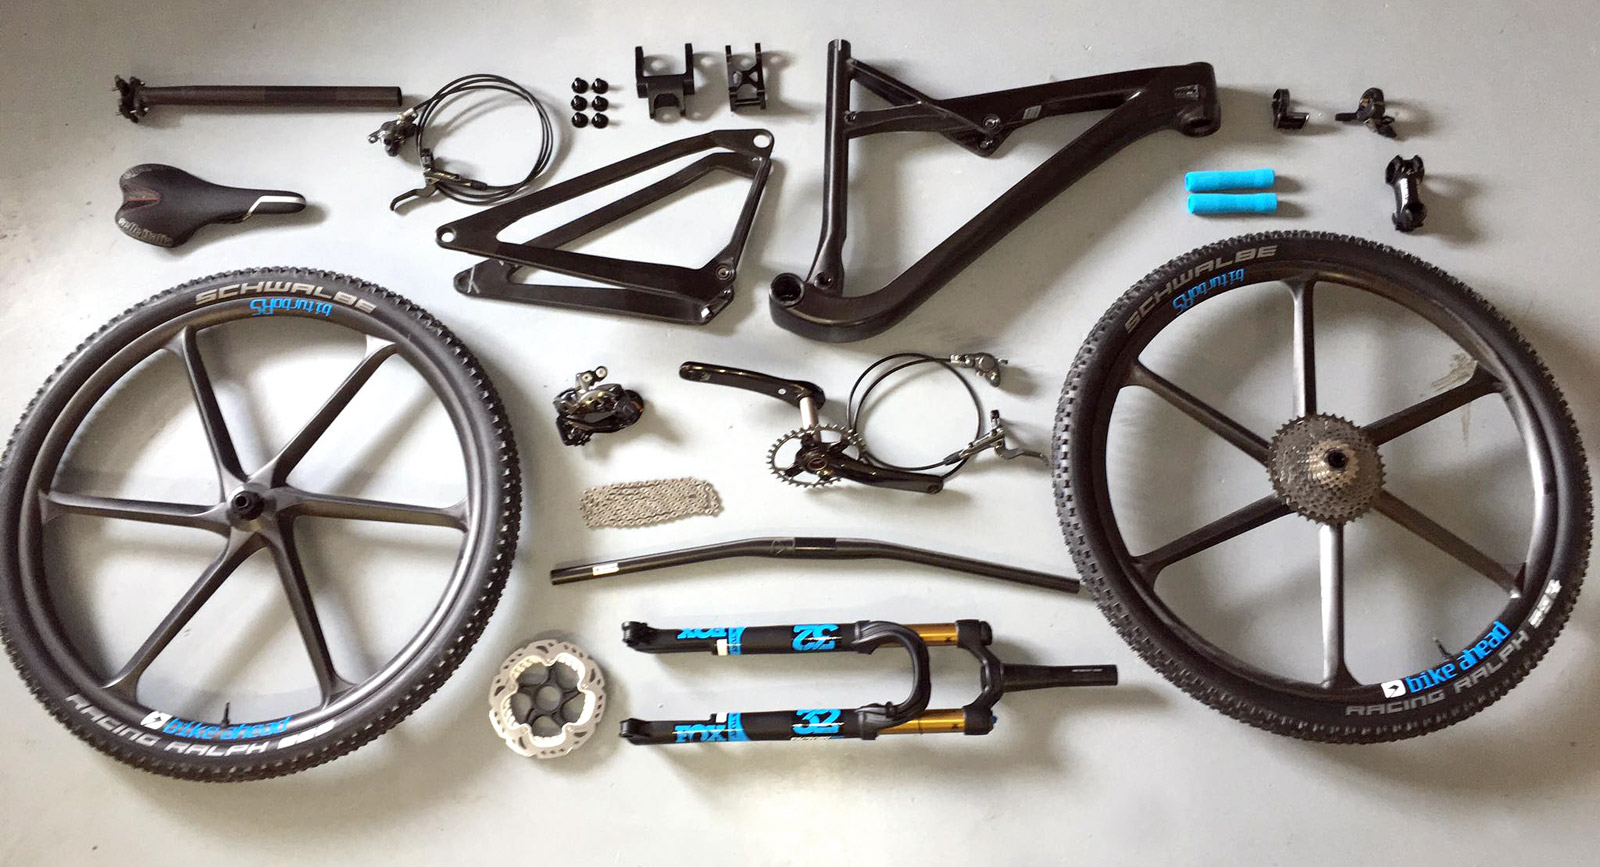 EB16: Light carbon full-suspension Stoll M1, customized to your trail riding